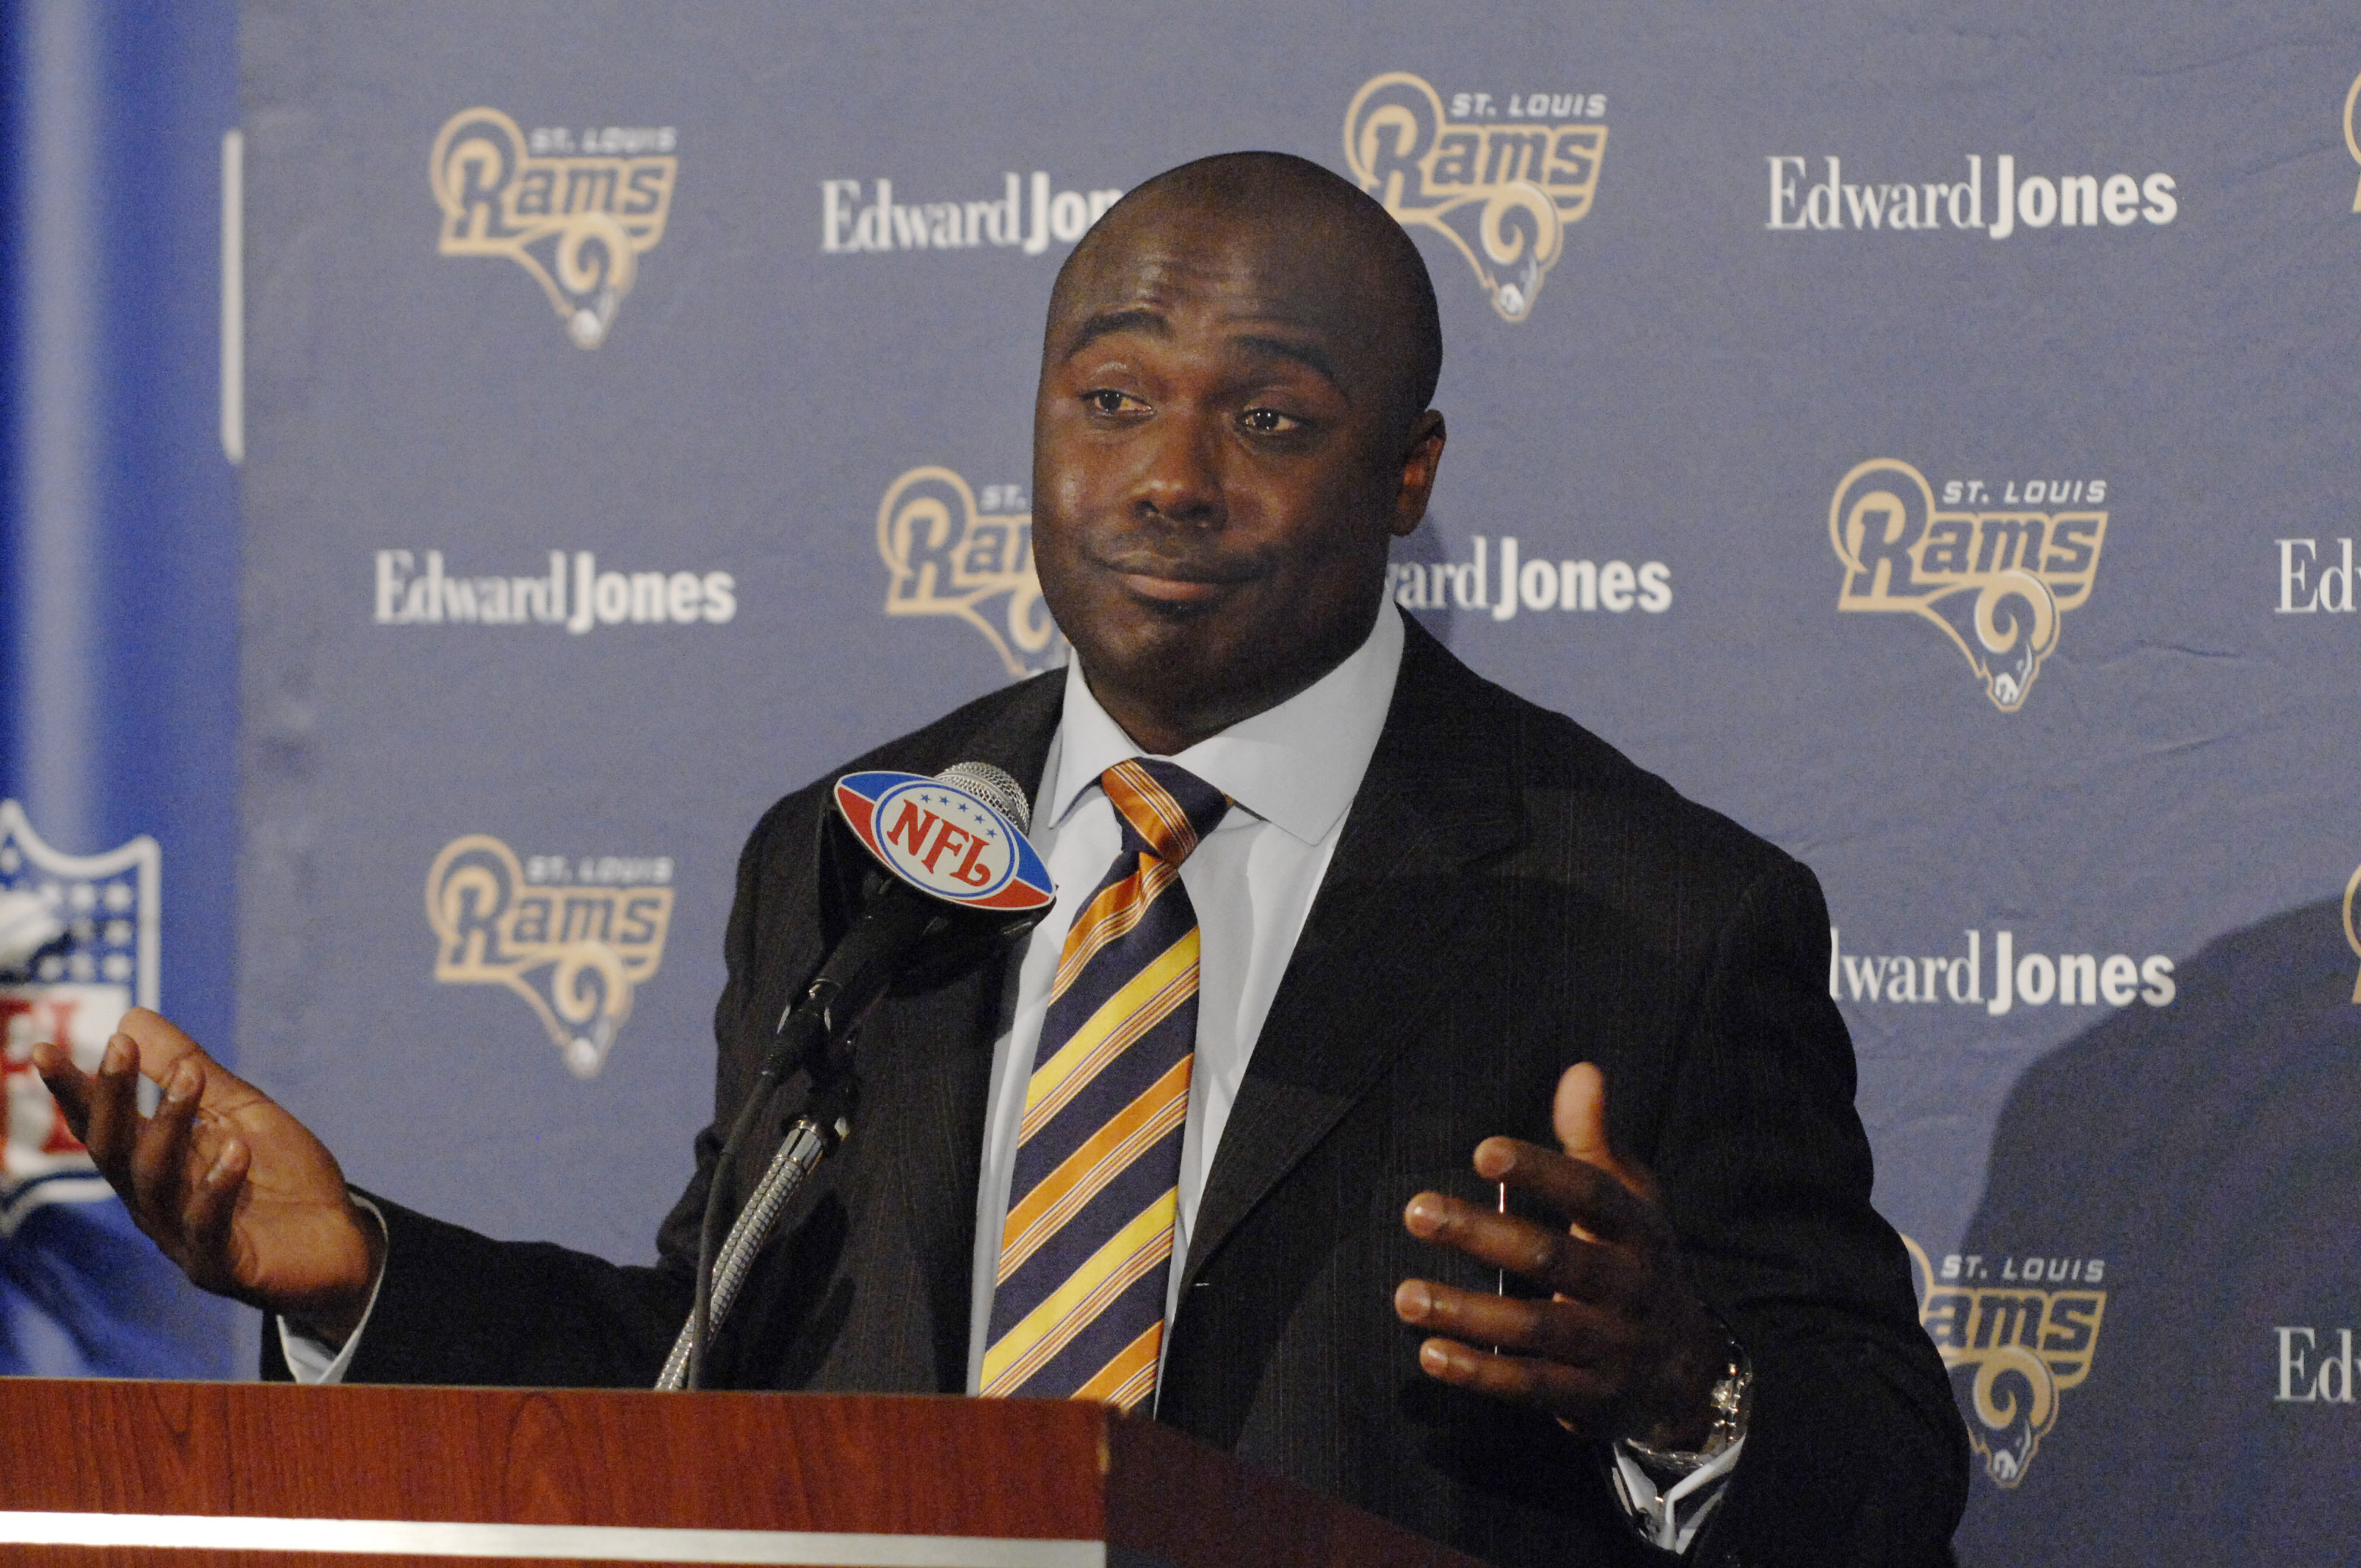 Marshall Faulk was the electric running back for the "Greatest Show on Turf," but he also had a busy personal life that led to a slew of kids.